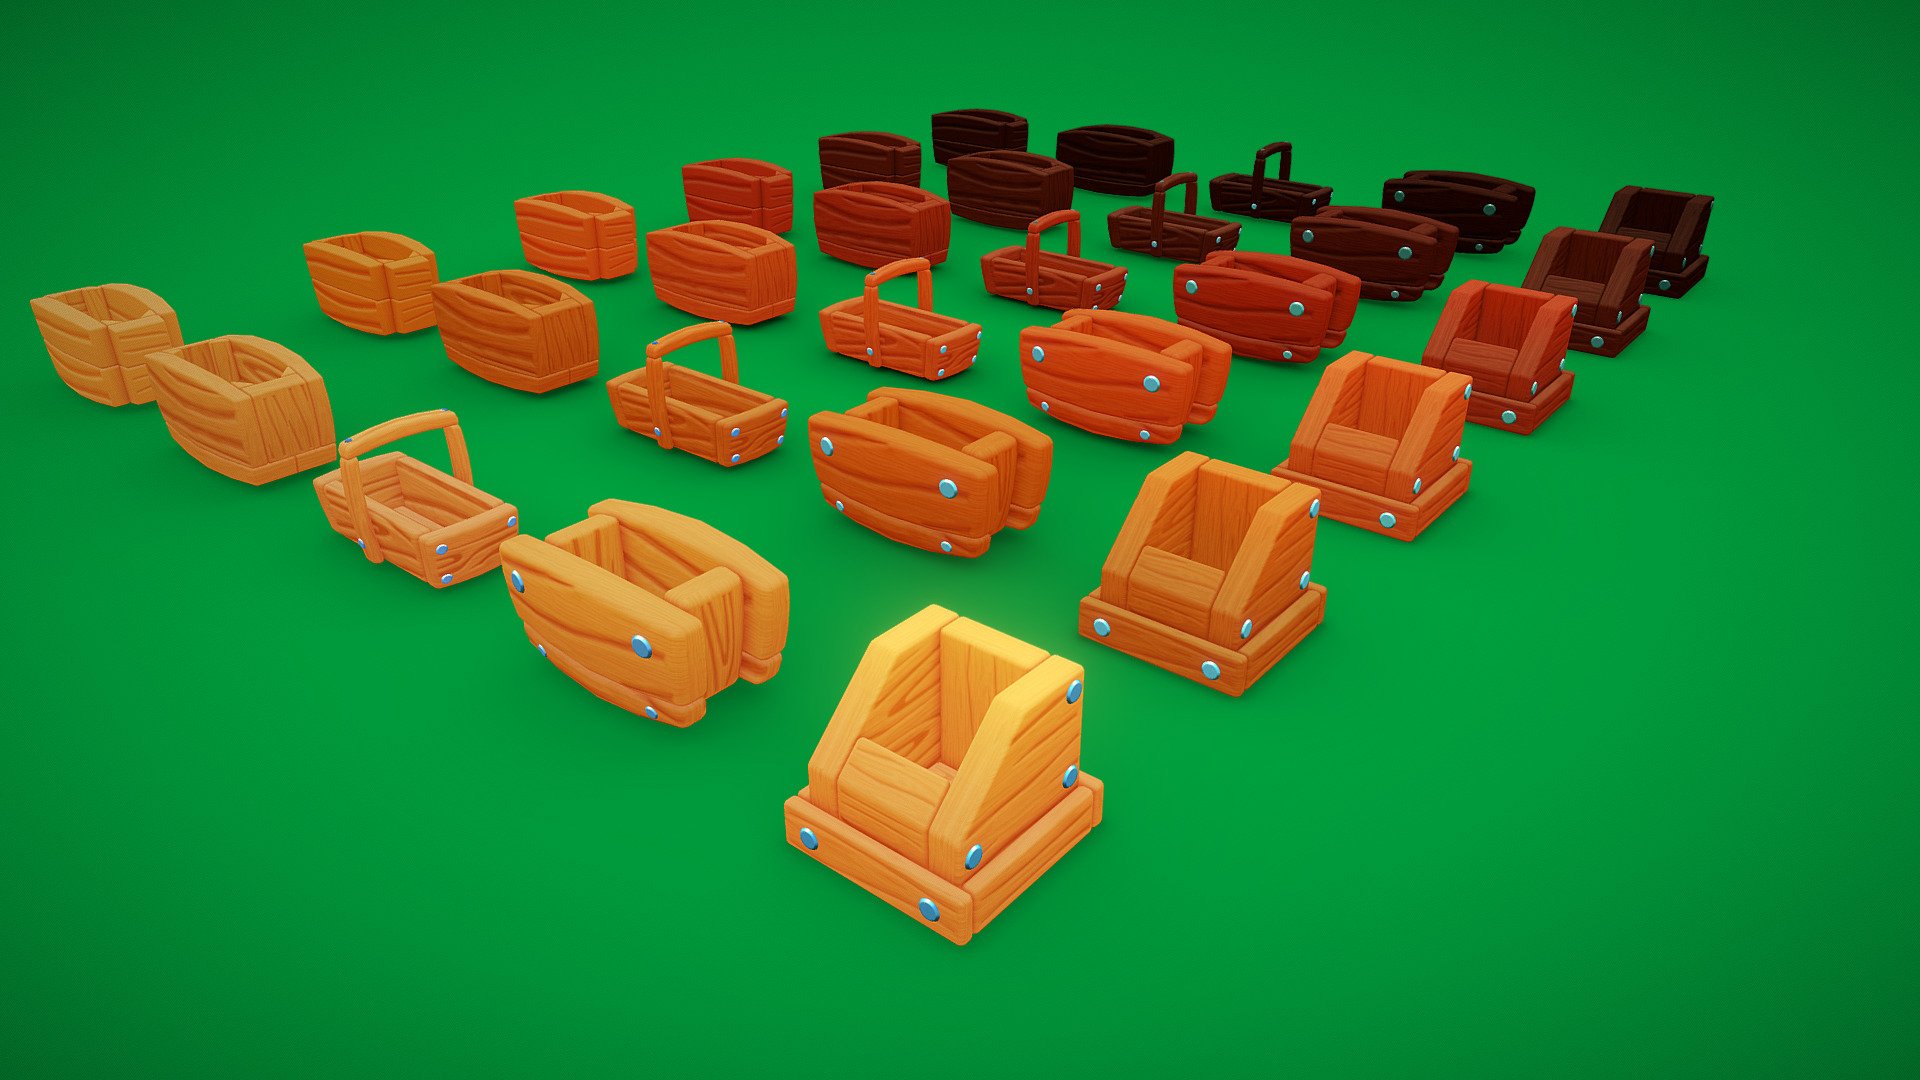 This pack contains 5 Low Poly 3D wooden crates with 6 different diffuse texture for each crate. Fits perfect as a decoration in exterior and interior stylized/cartoonish level design for games or VR/AR applications.

Features:




Number of Meshes: 5;

LODs: None;

Texture Size: 2048x2048 pixels;

Maps: Diffuse only;

Total Number of Textures: 30;

Supported Development Platforms: any

Supported Target Build Platforms: any

Polycount: 




Box 01: 1.642 polygons;

Box 02: 658 polygons;

Box 03: 1.356 polygons;

Box 04: 1.008 polygons;

Box 05: 1.246 polygons;
 - Pack of Cartoon Wooden Crates - Buy Royalty Free 3D model by Rafael Ribeiro (@ribeirorafael) 3d model